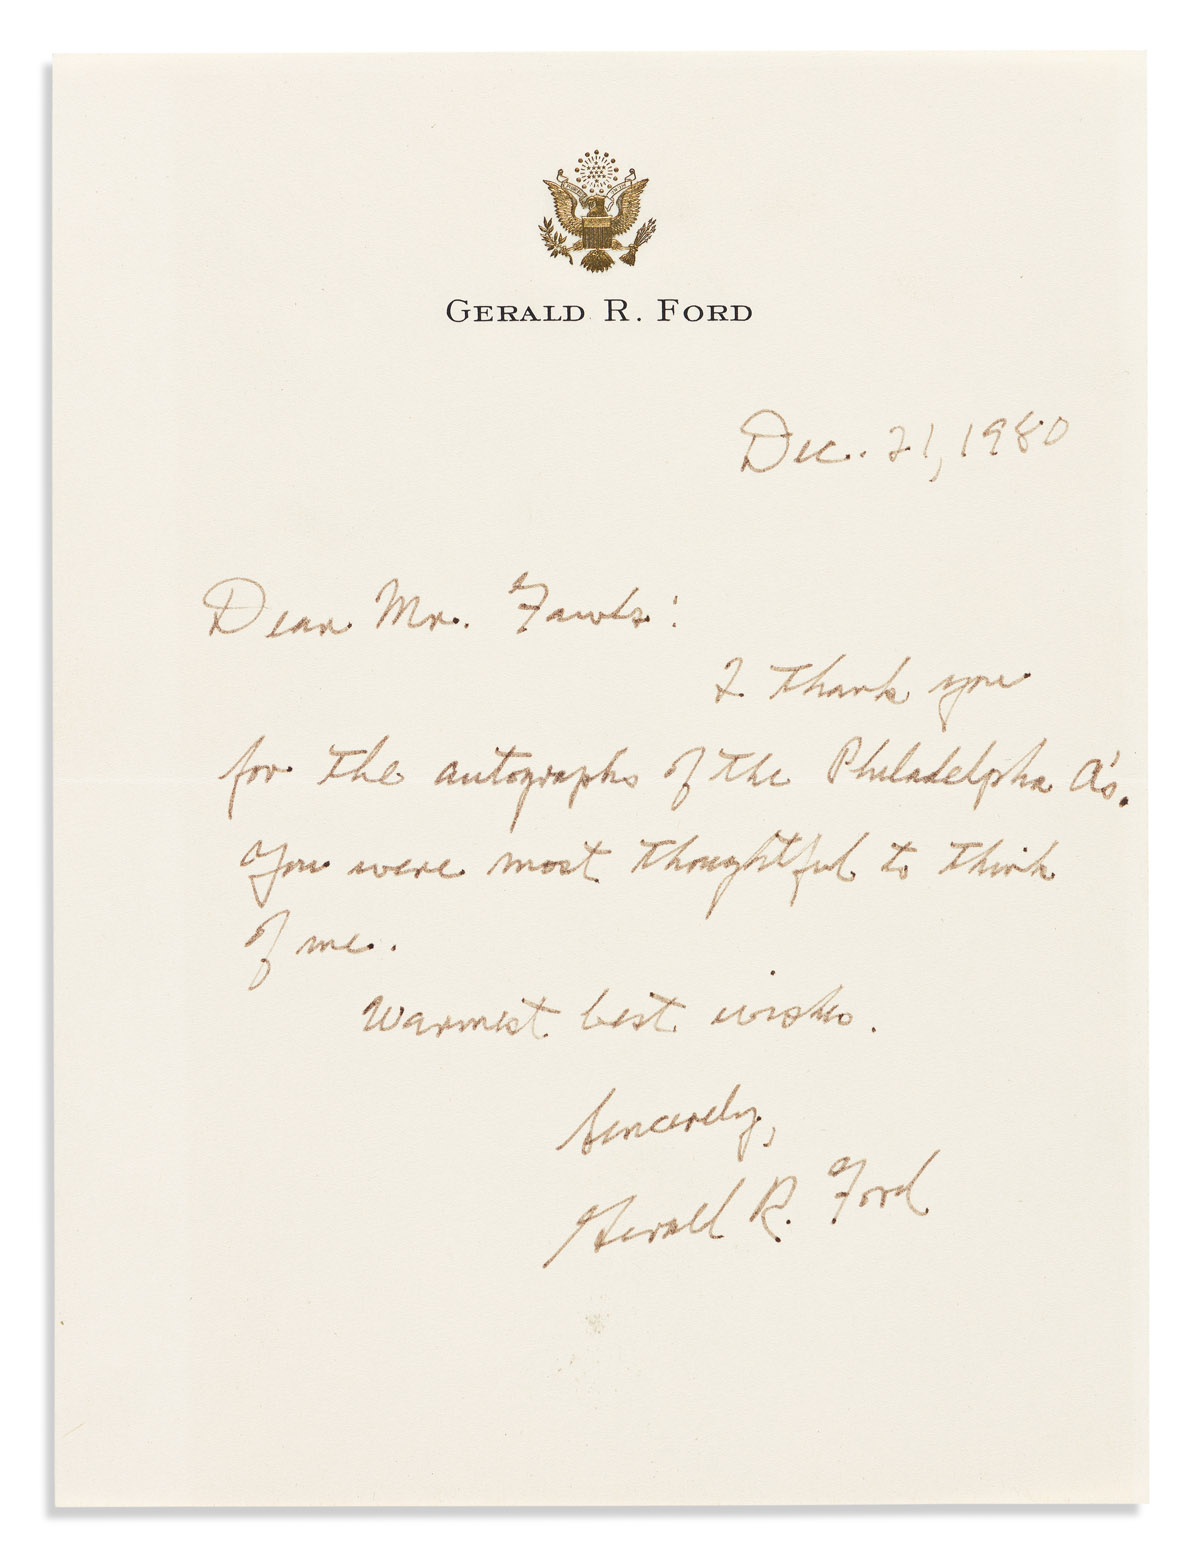 FORD, GERALD R. Autograph Letter Signed, to Dear Mr. Fawls,